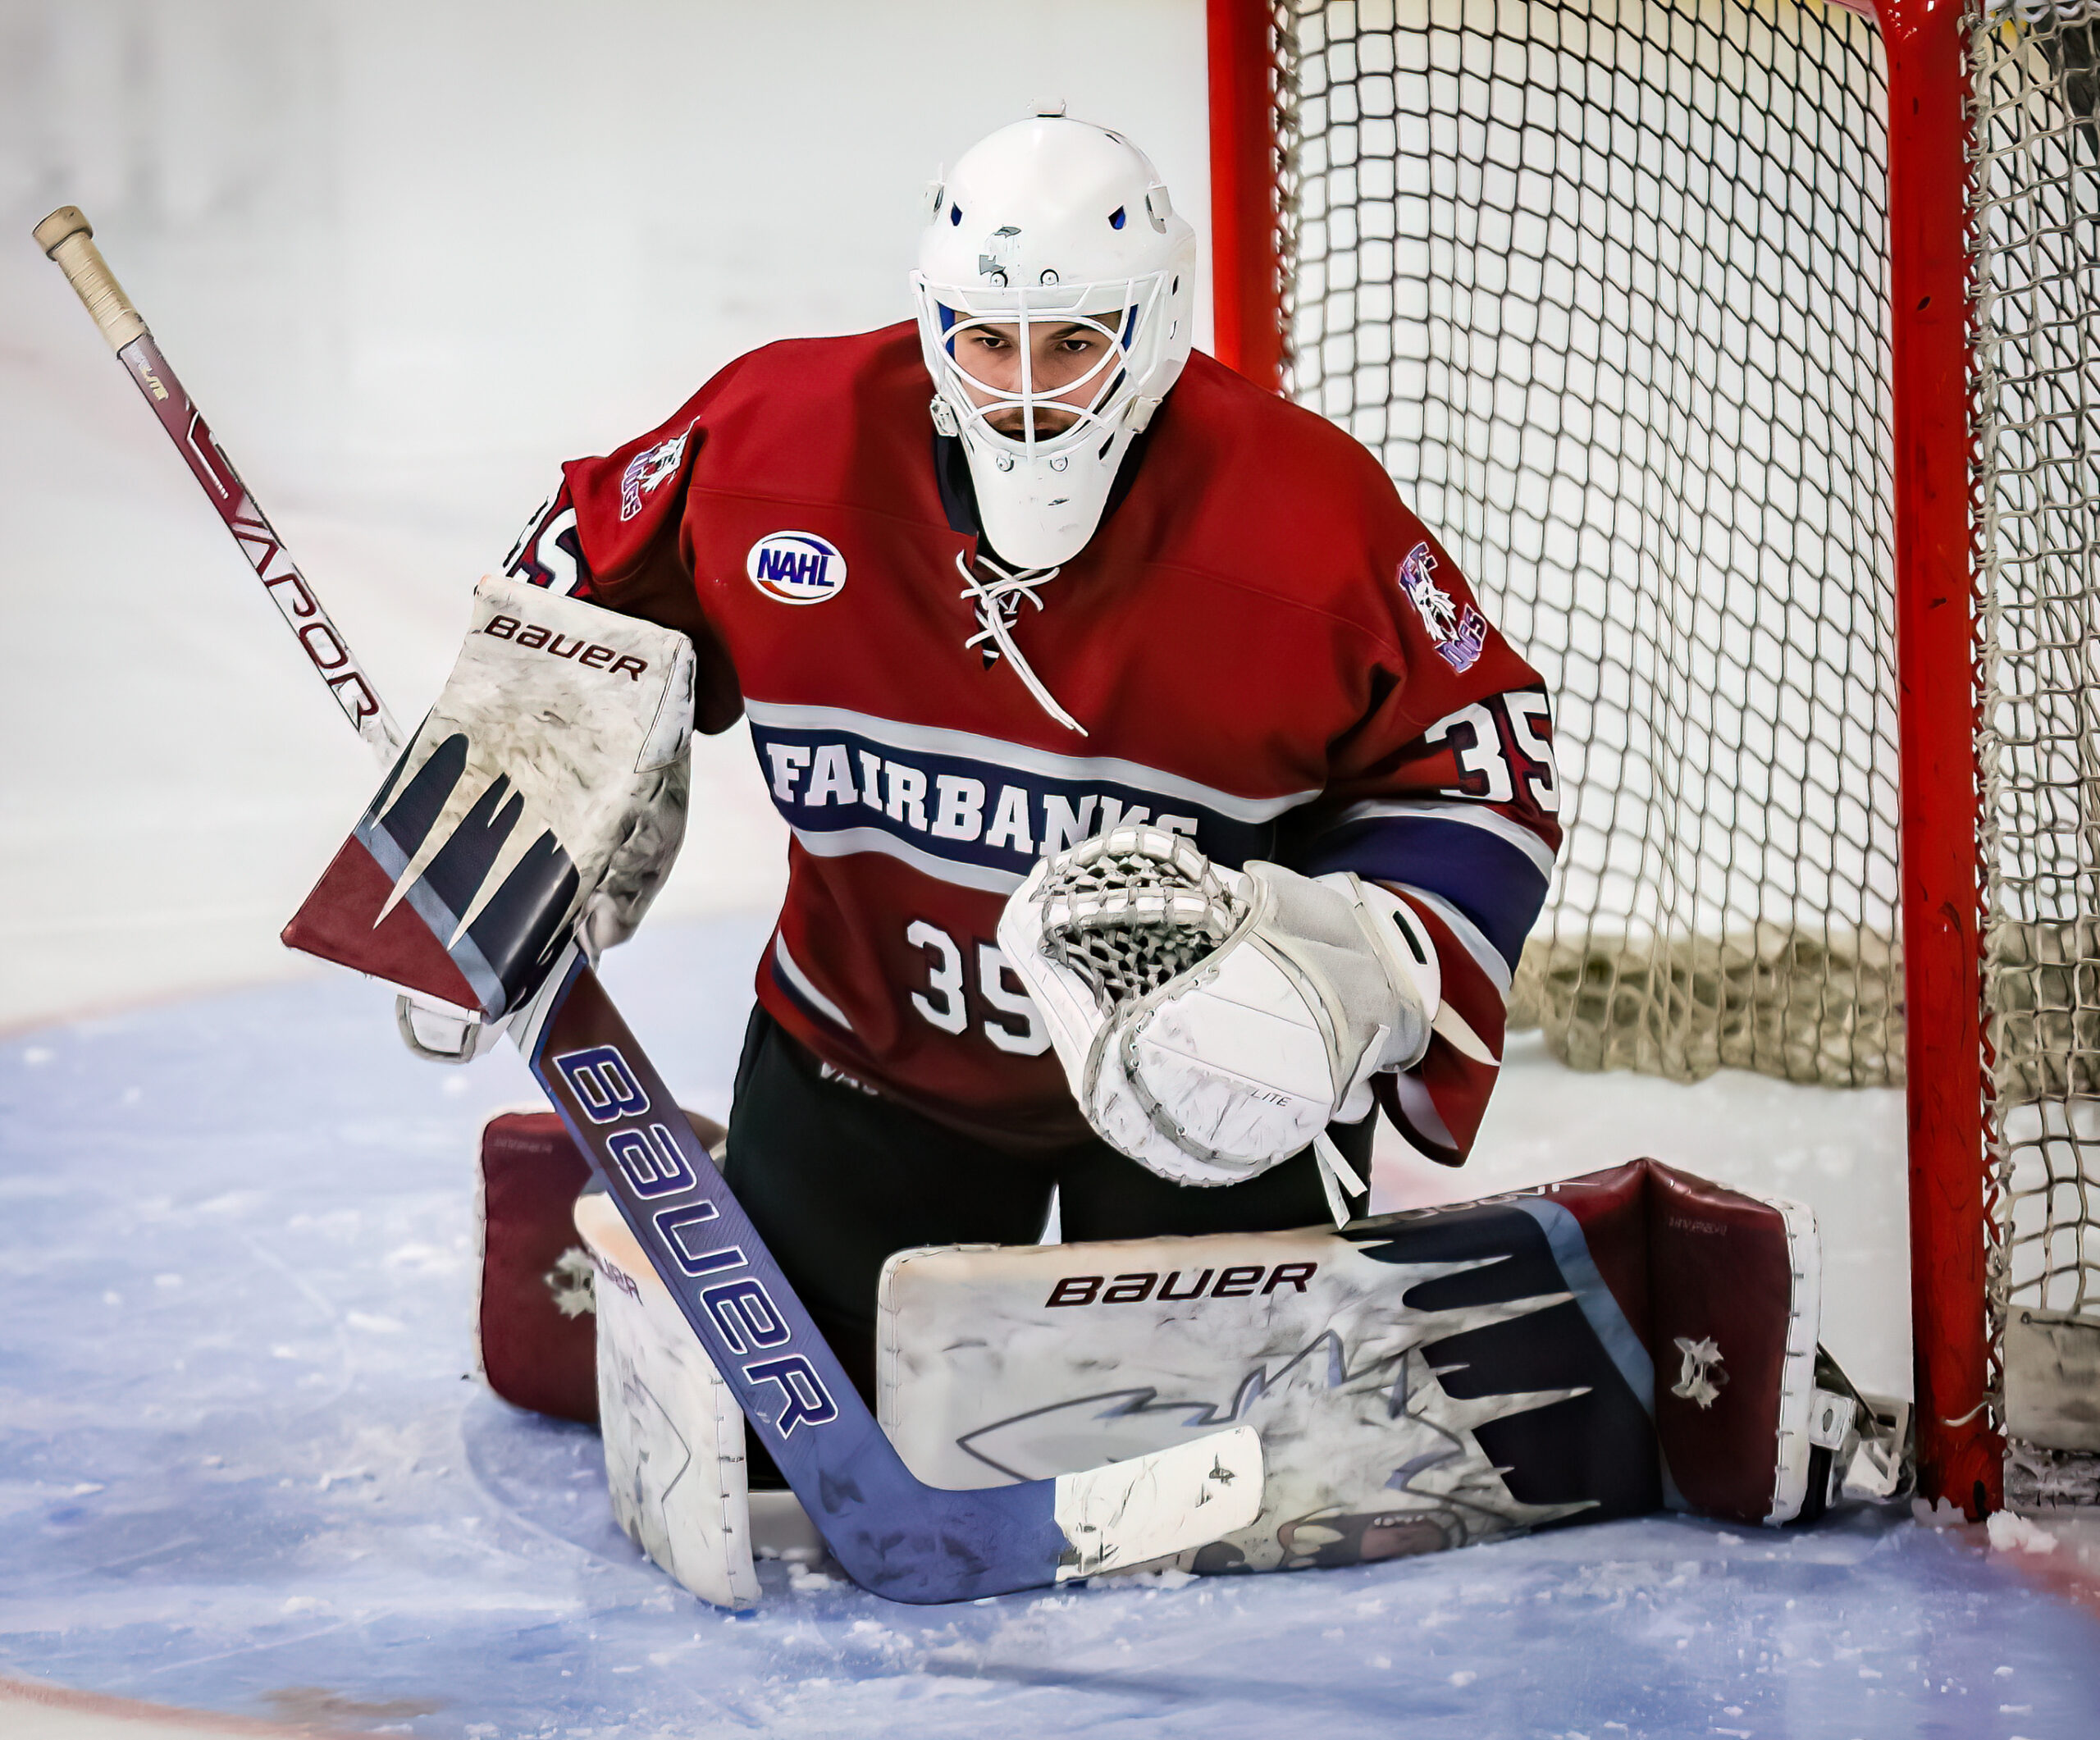 Loss to Chippewa ends Ice Dogs' playoff hopes, Ice Dogs